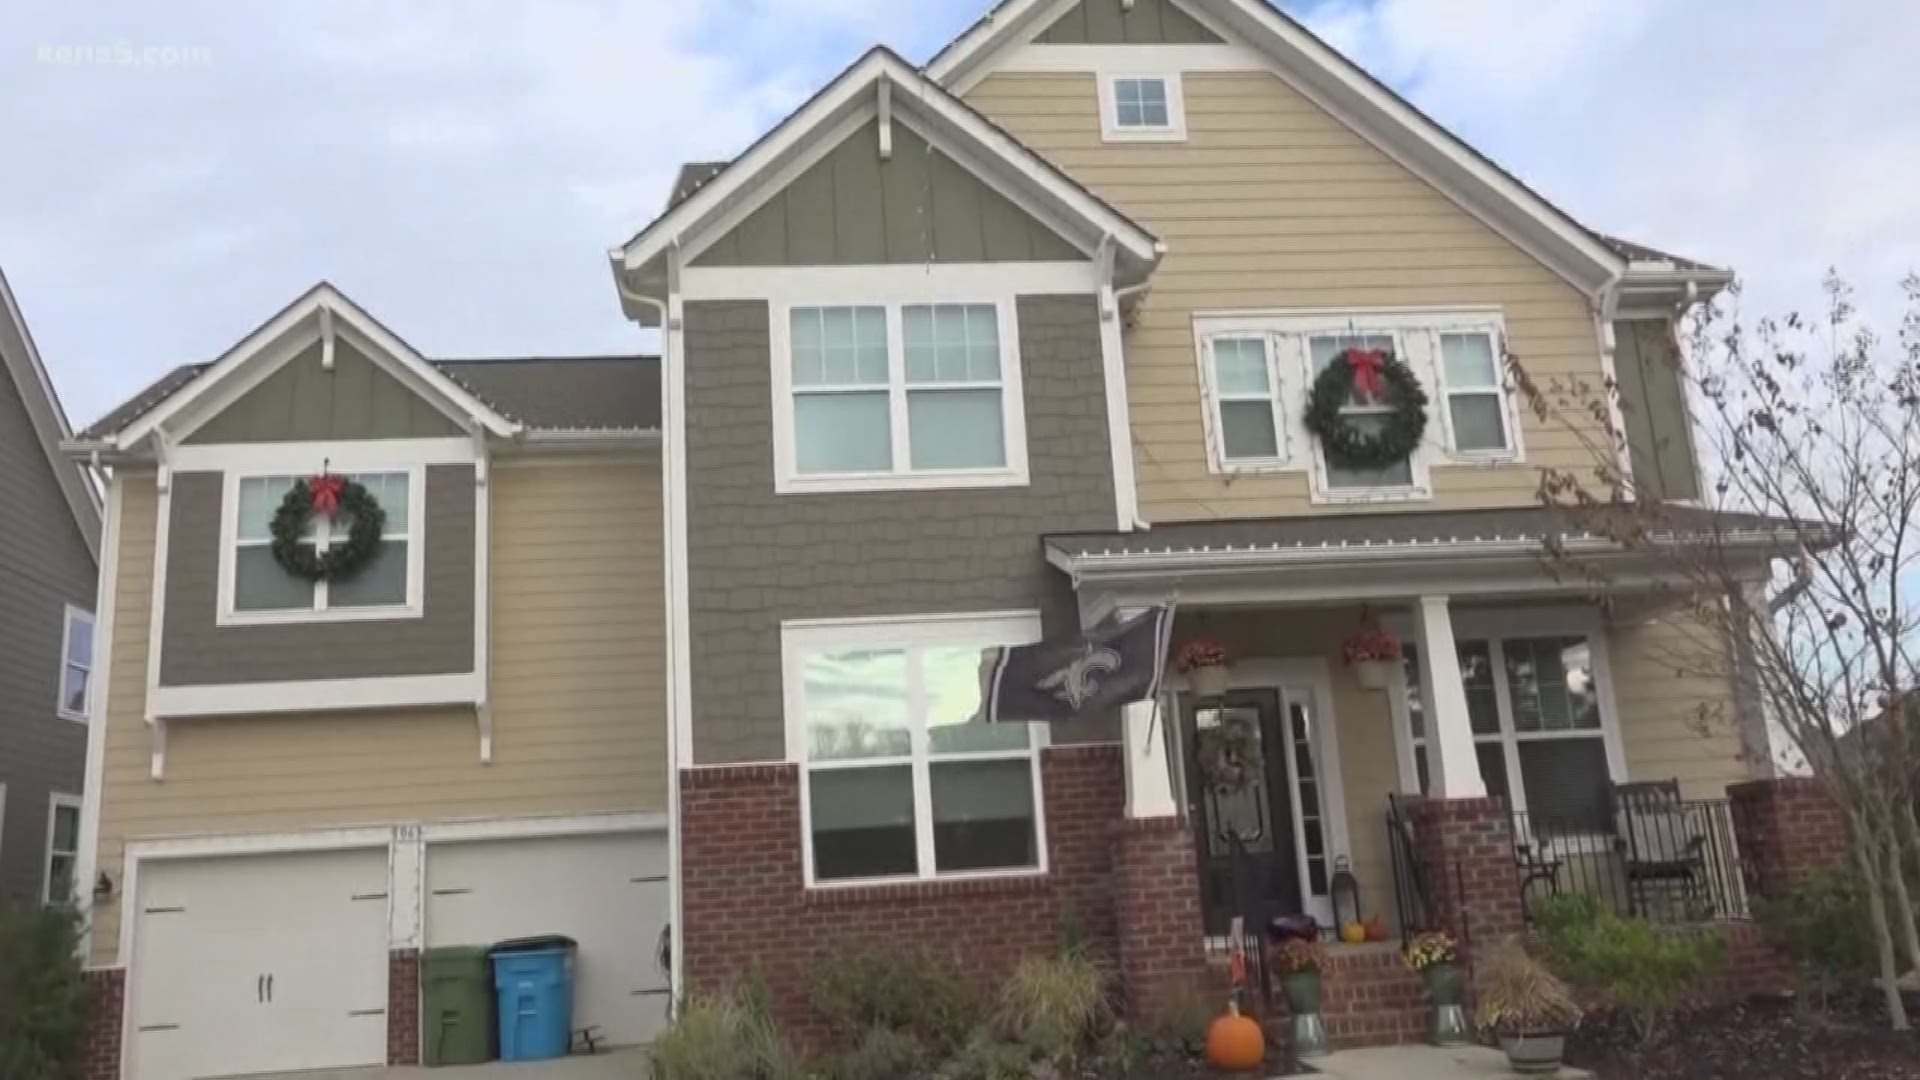 A father of four suffered traumatic injuries hanging lights on a South Carolina home.